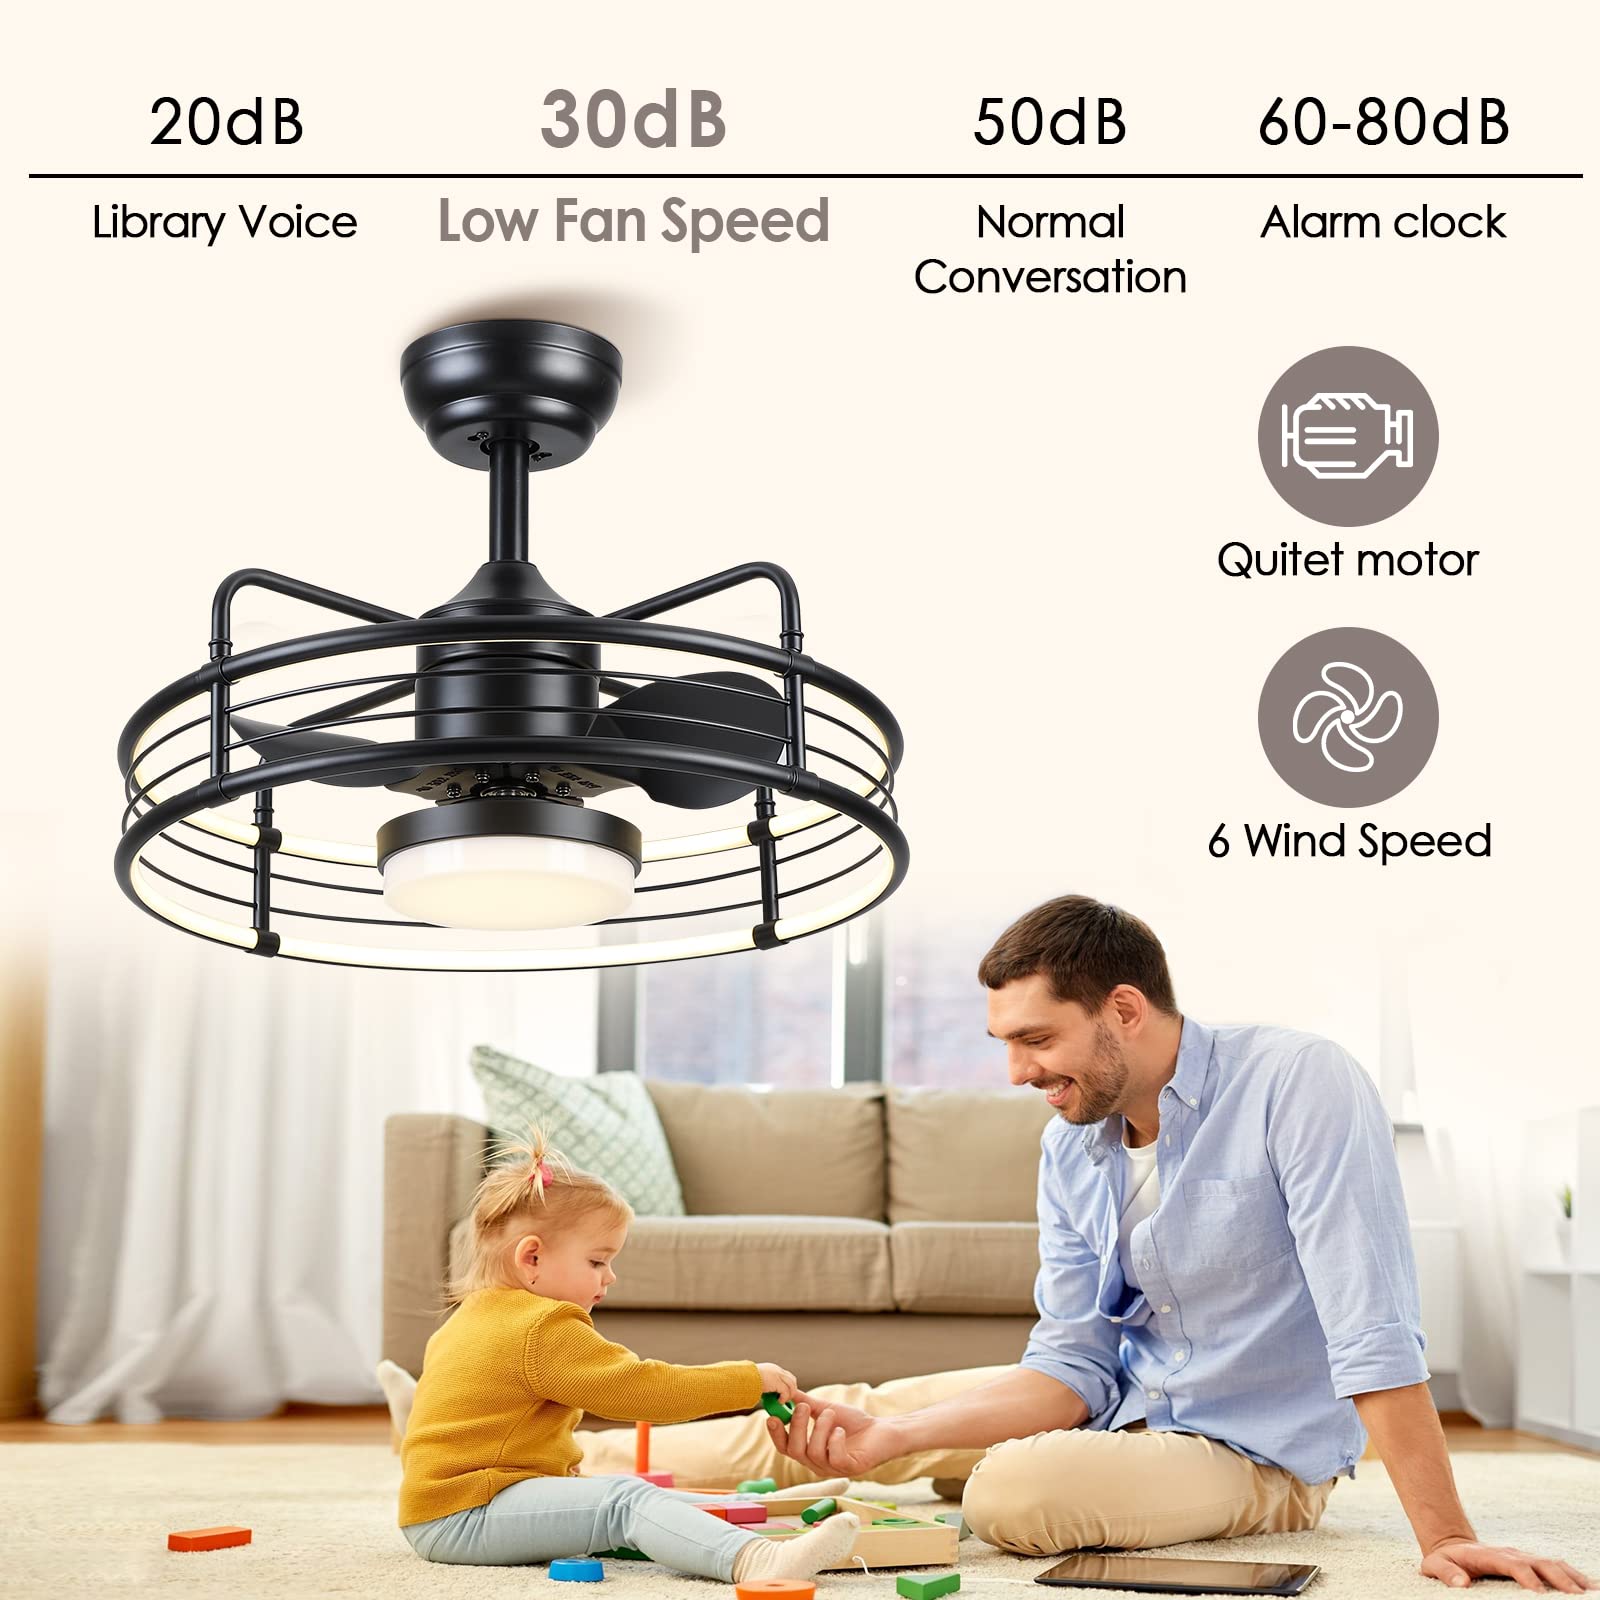 Asyko Caged Ceiling Fan with Light - Bladeless Black Ceiling Fans with Remote, Reversible and Dimmable, Low Profile Flush Mount Ceiling Fan with 6-Speed, Enclosed Led Fan Light for Bedroom, Kitchen…